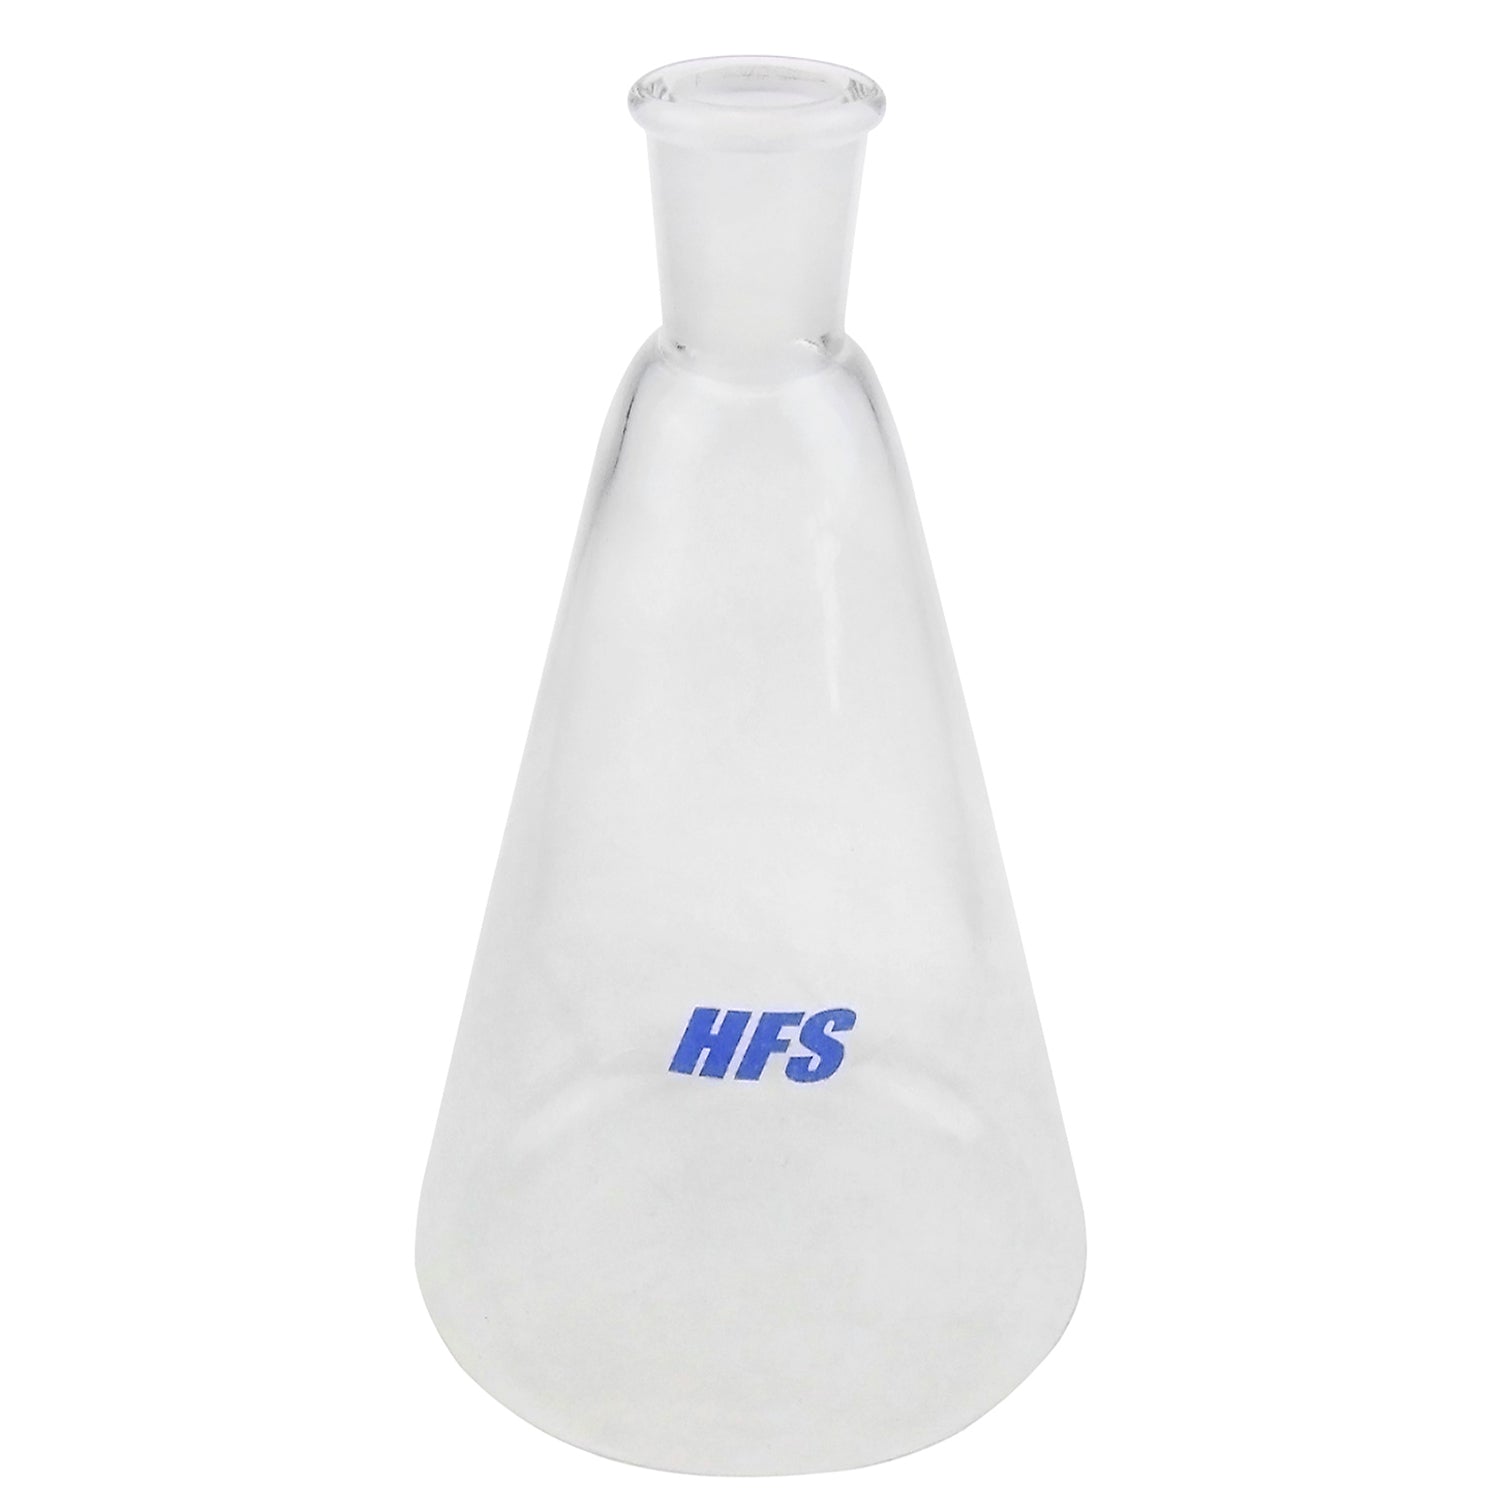 Hardware Factory Store Inc - Erlenmeyer Flask - [variant_title]